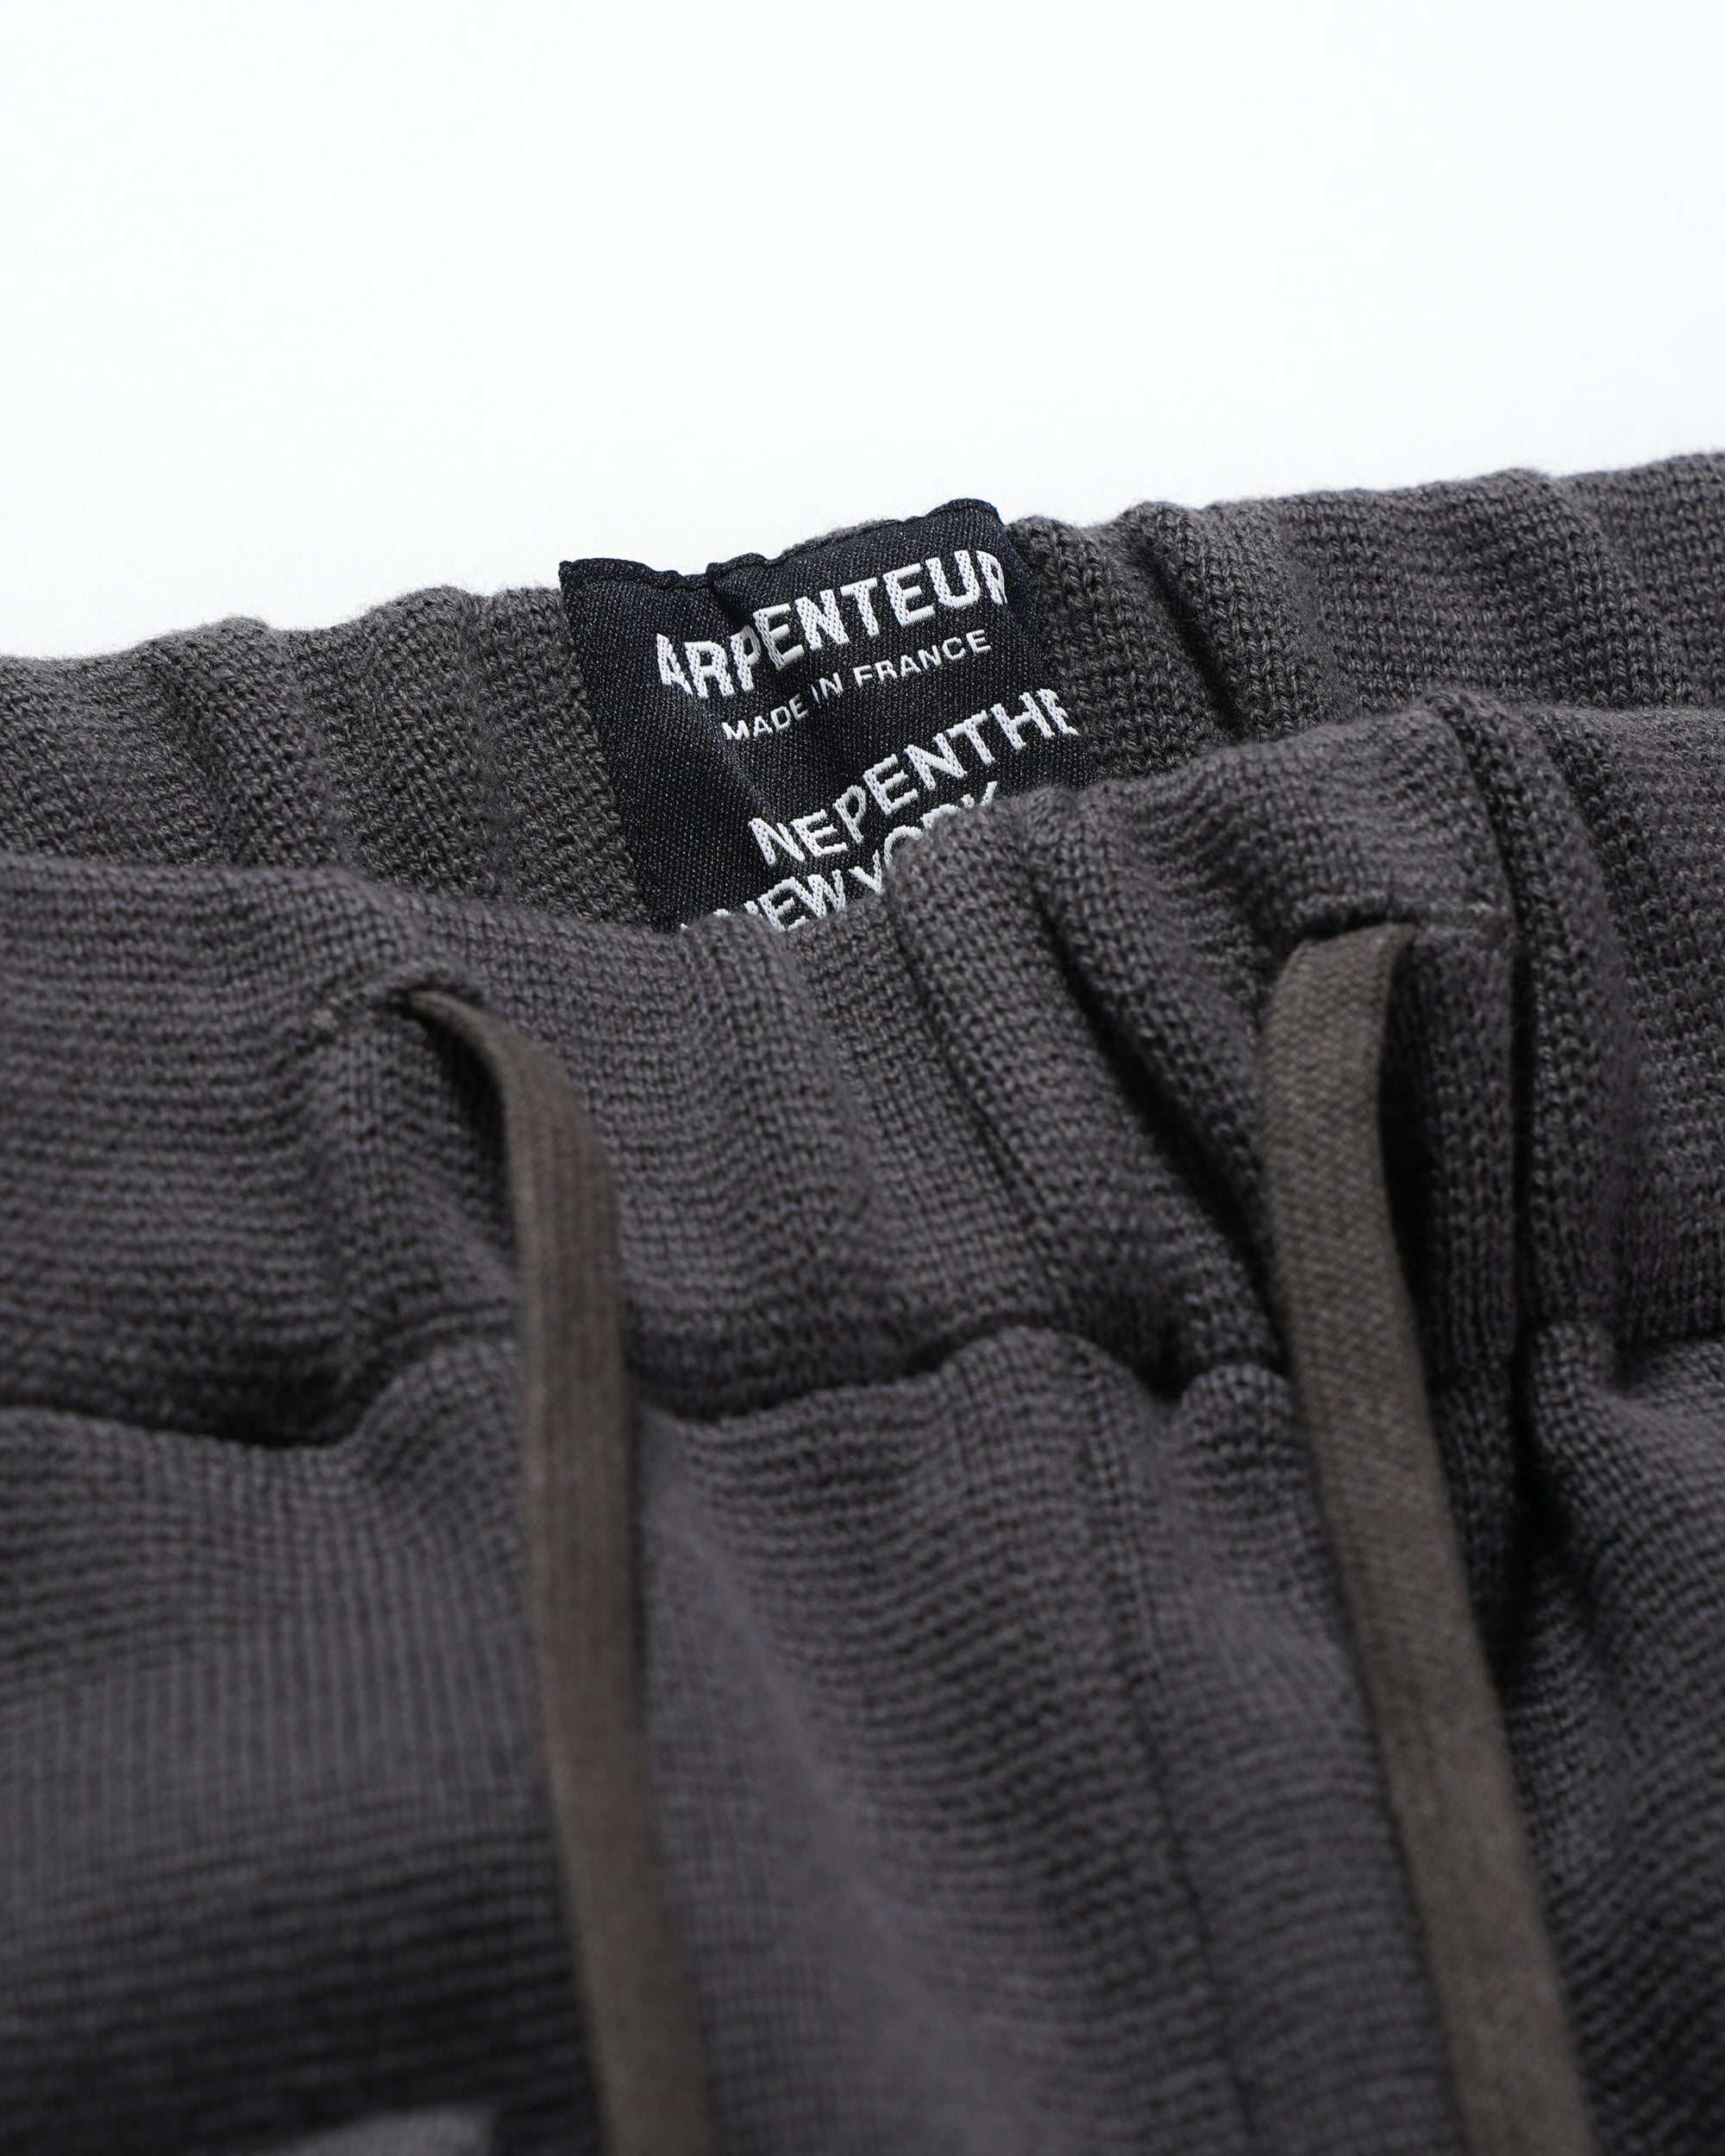 NNY x Arpenteur Utility Knit Pants - Combed Cotton Milano - Taupe